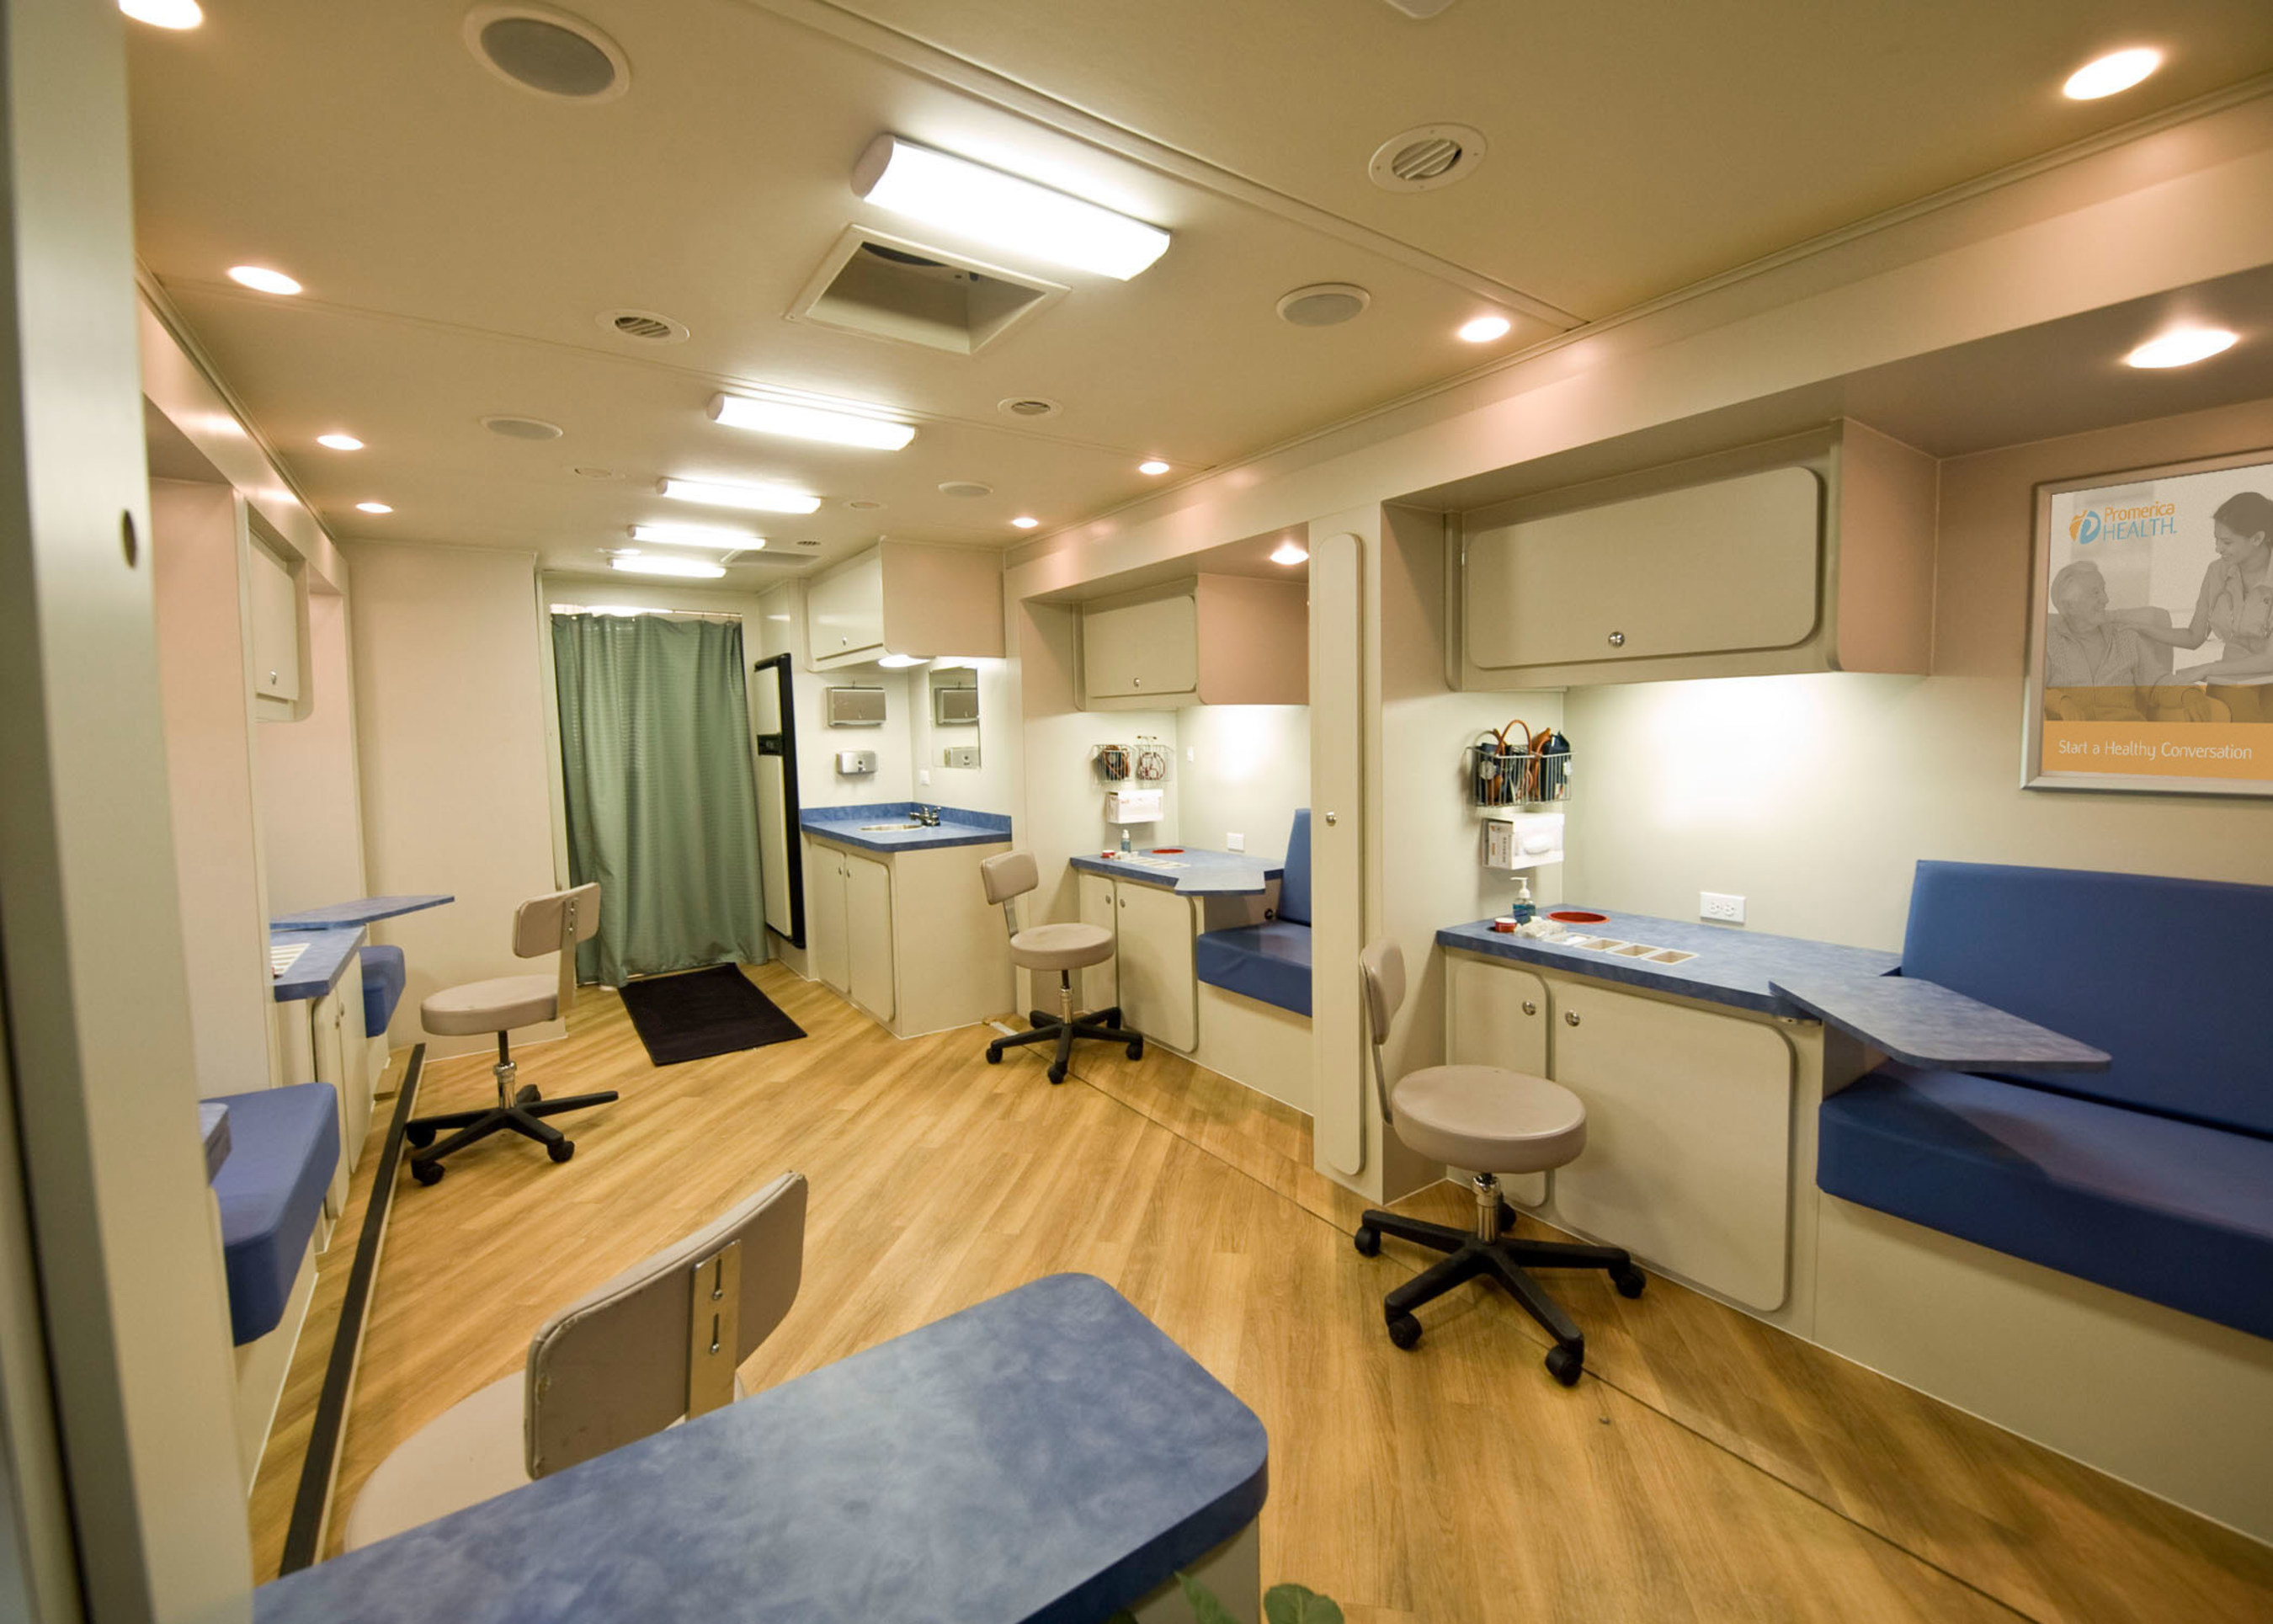 Promerica Health offers a full fleet of customizable vehicles to deploy health and wellness engagements, including 40-foot mobile health screening units. The interior houses up to six private screening areas with state-of-the-art medical equipment offering patients a private and comfortable environment.